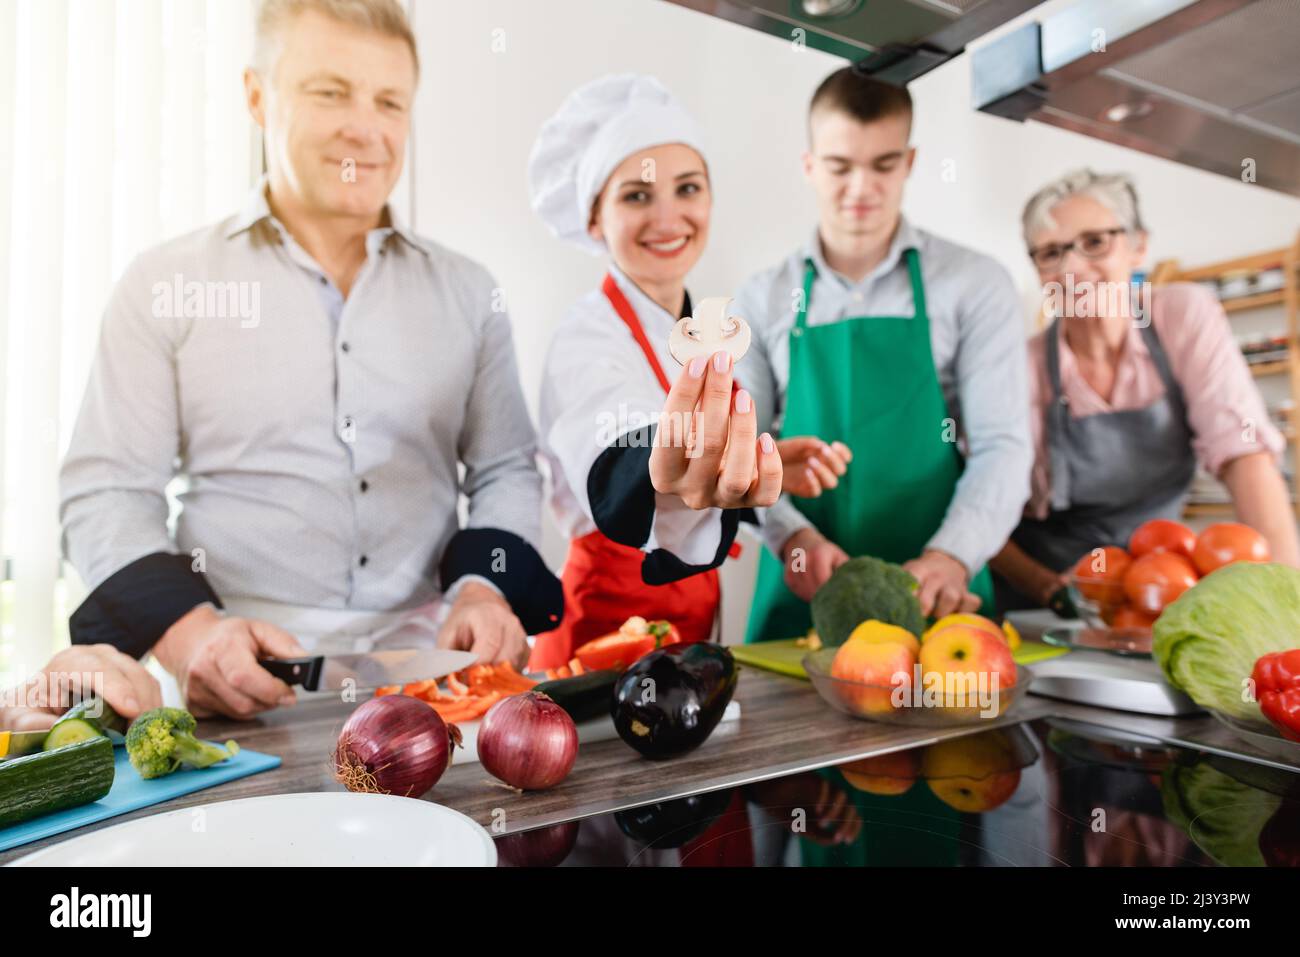 Dietician showing her trainees how to cook healthily Stock Photo